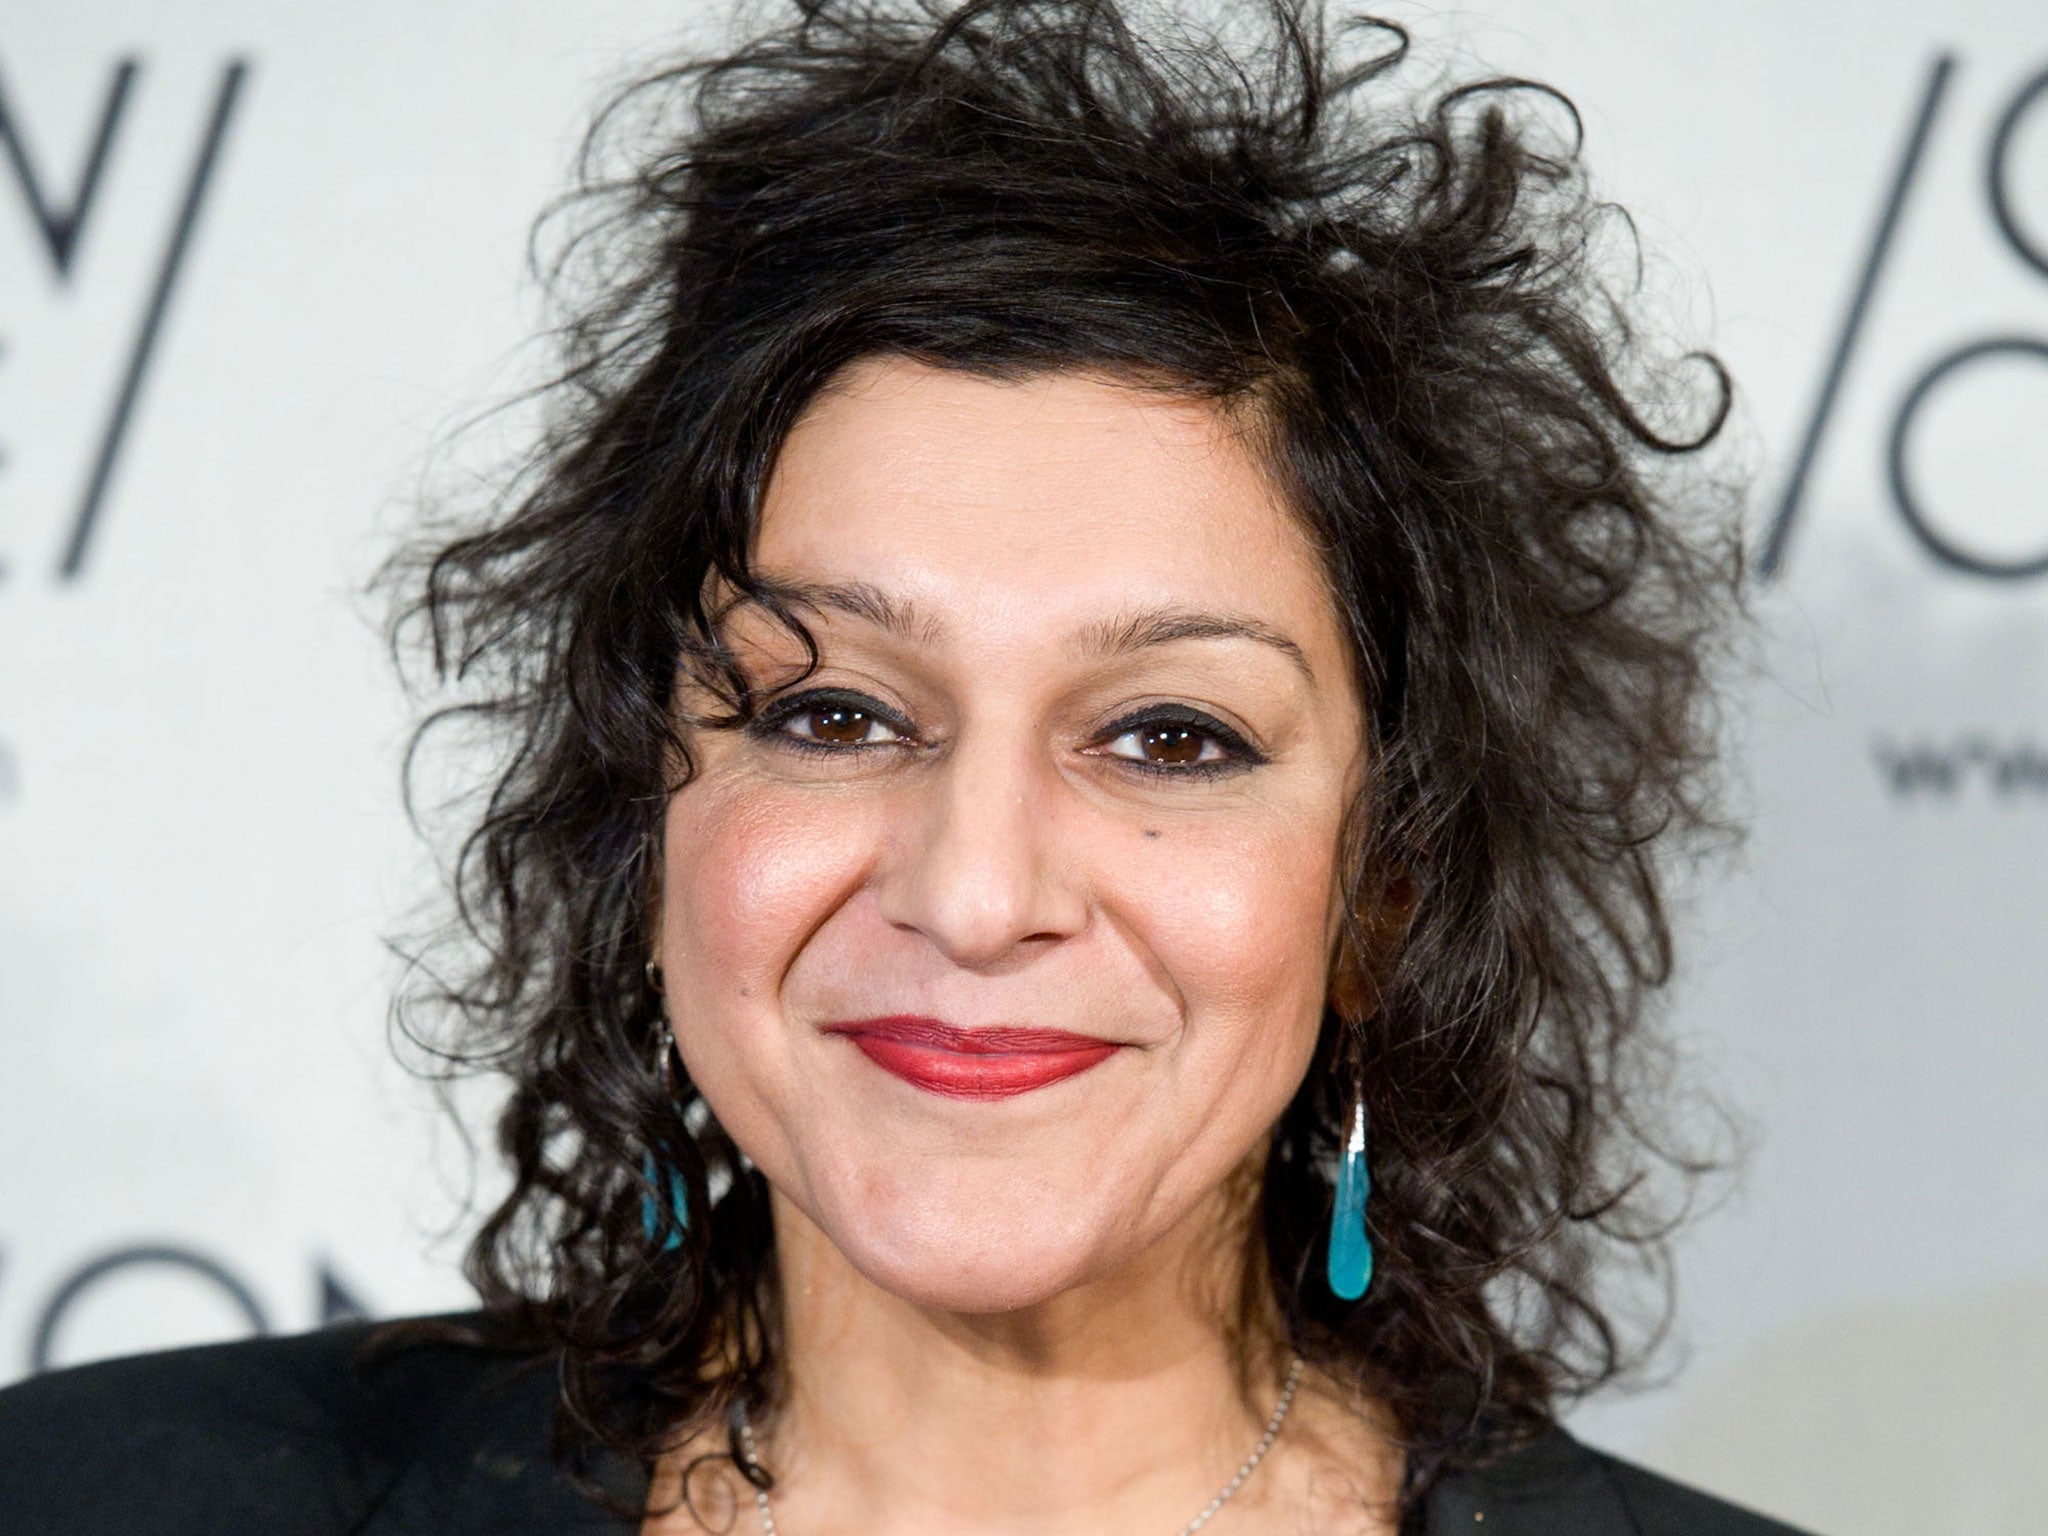 Meera Syal was a member of the team that created Goodness Gracious Me